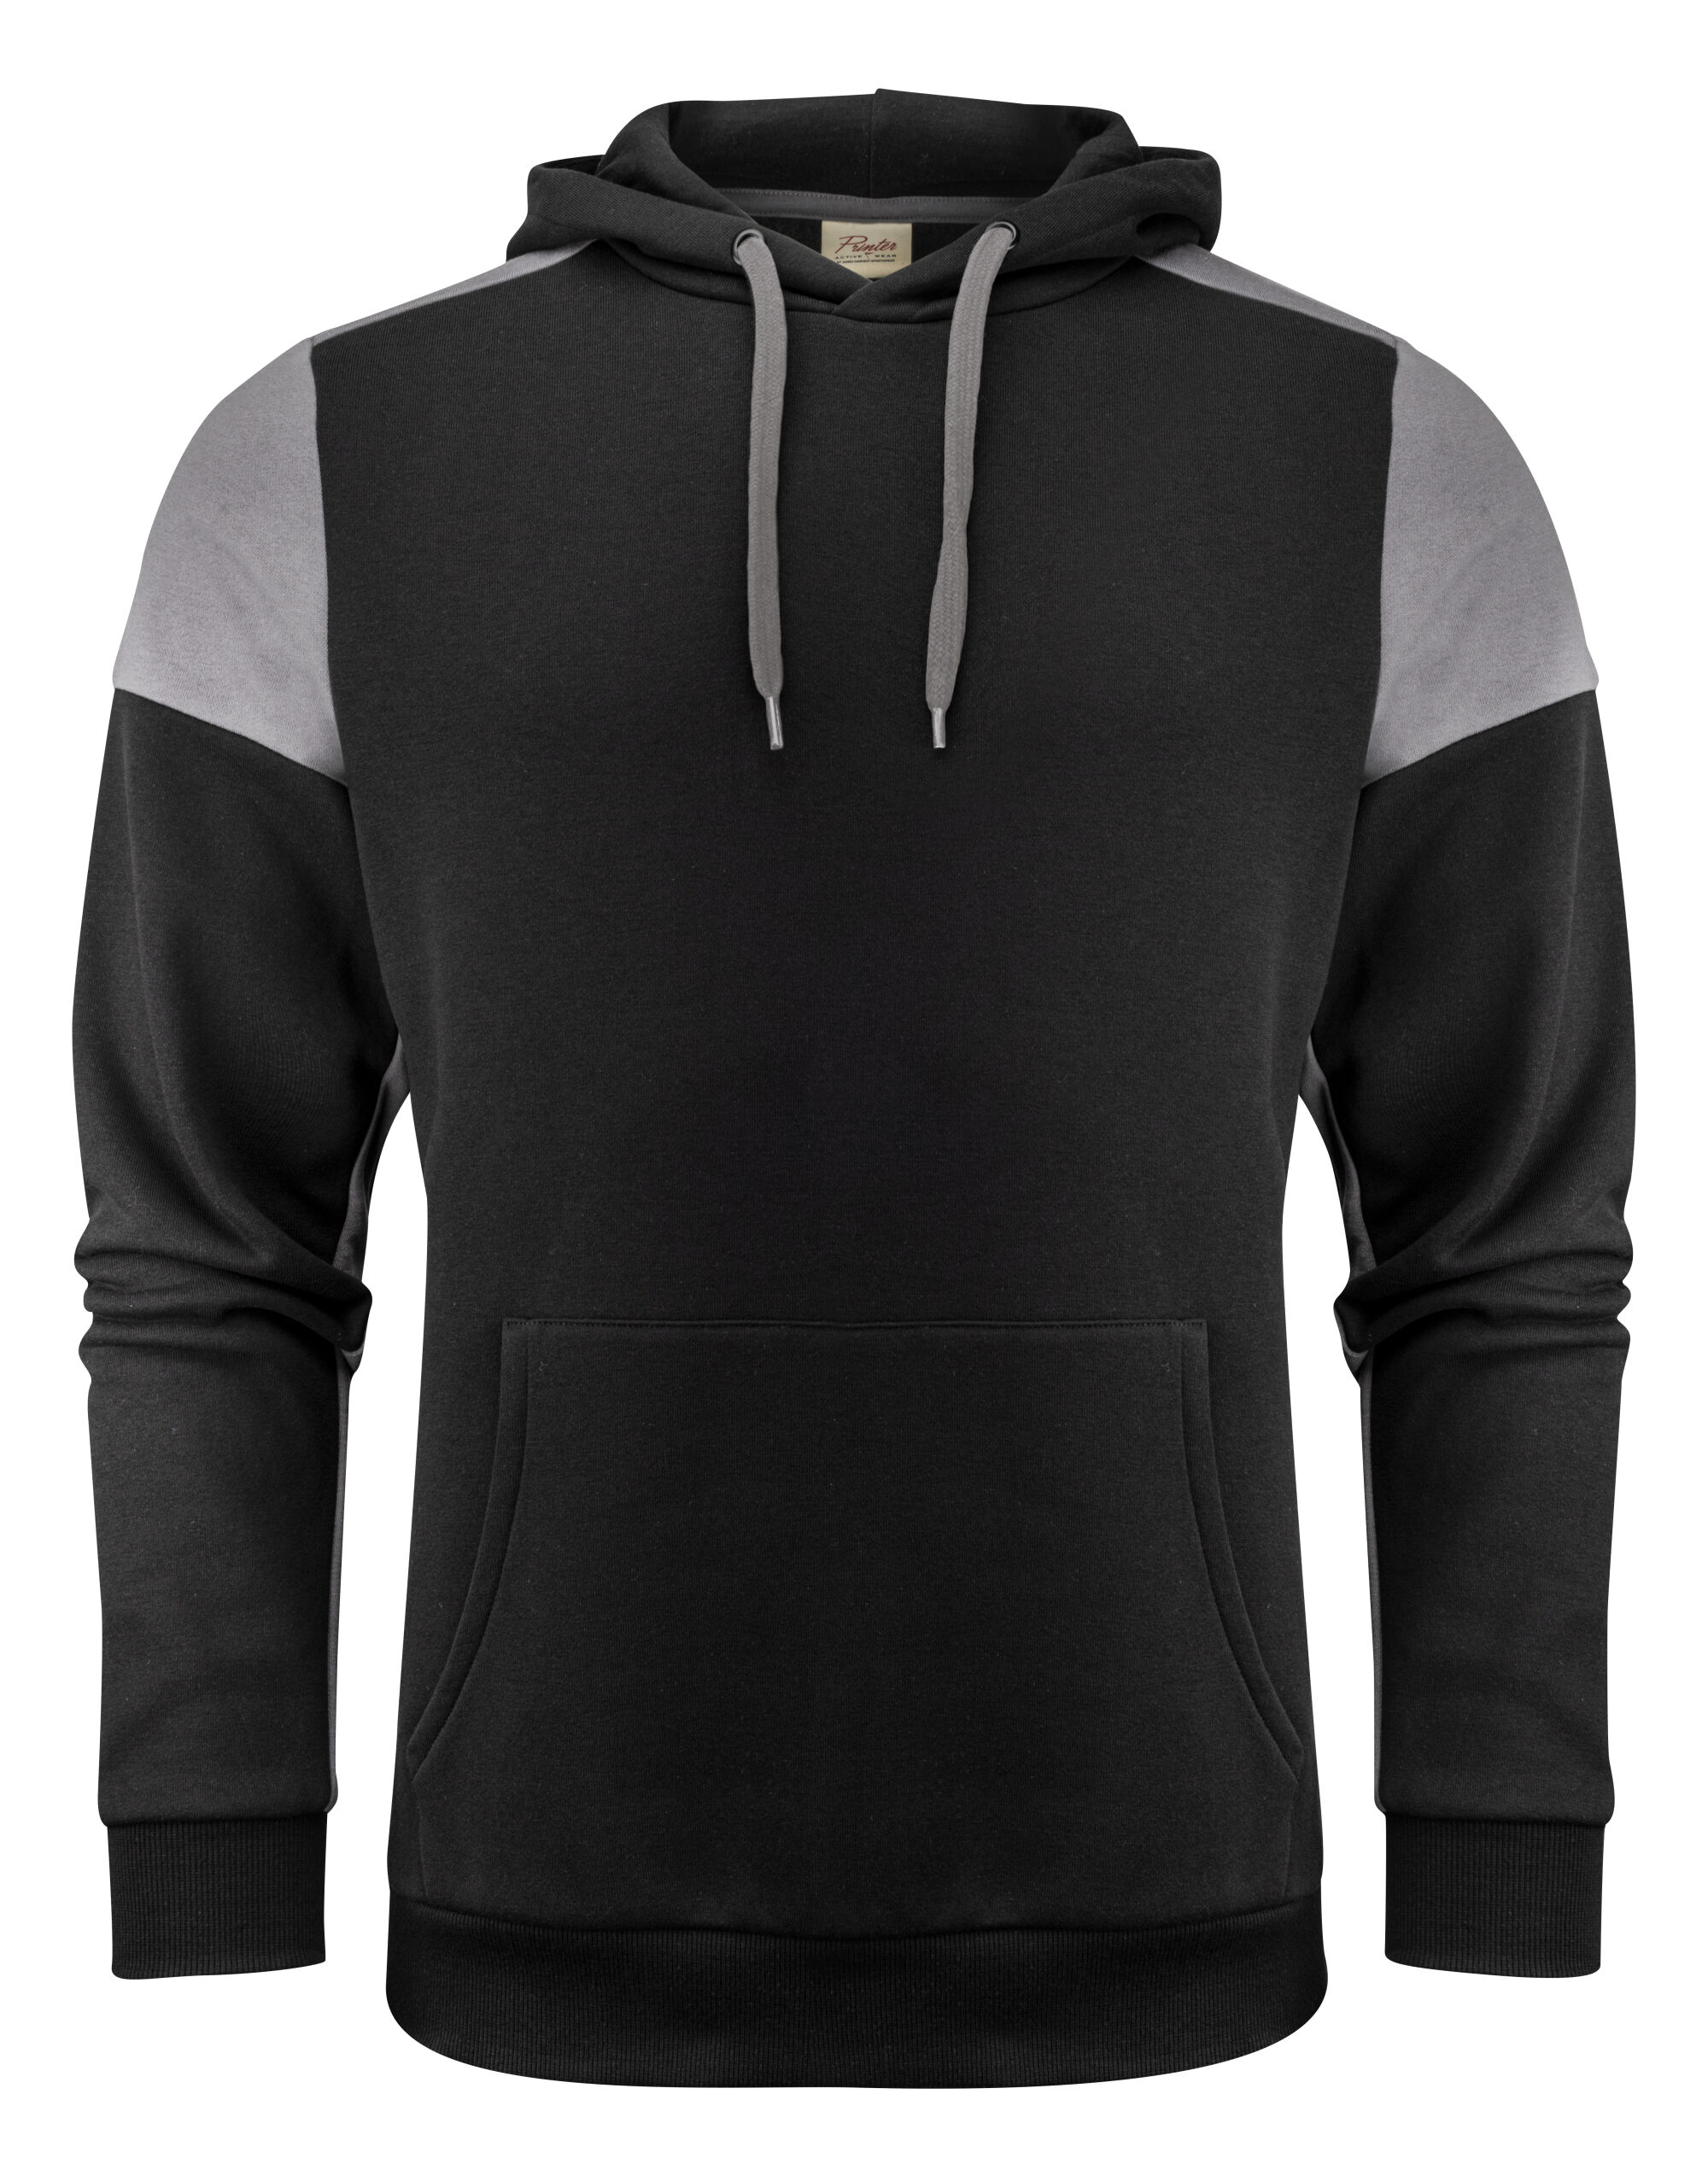 Prime Hoody_Black_Anthracite_Front_pp2262070_166177